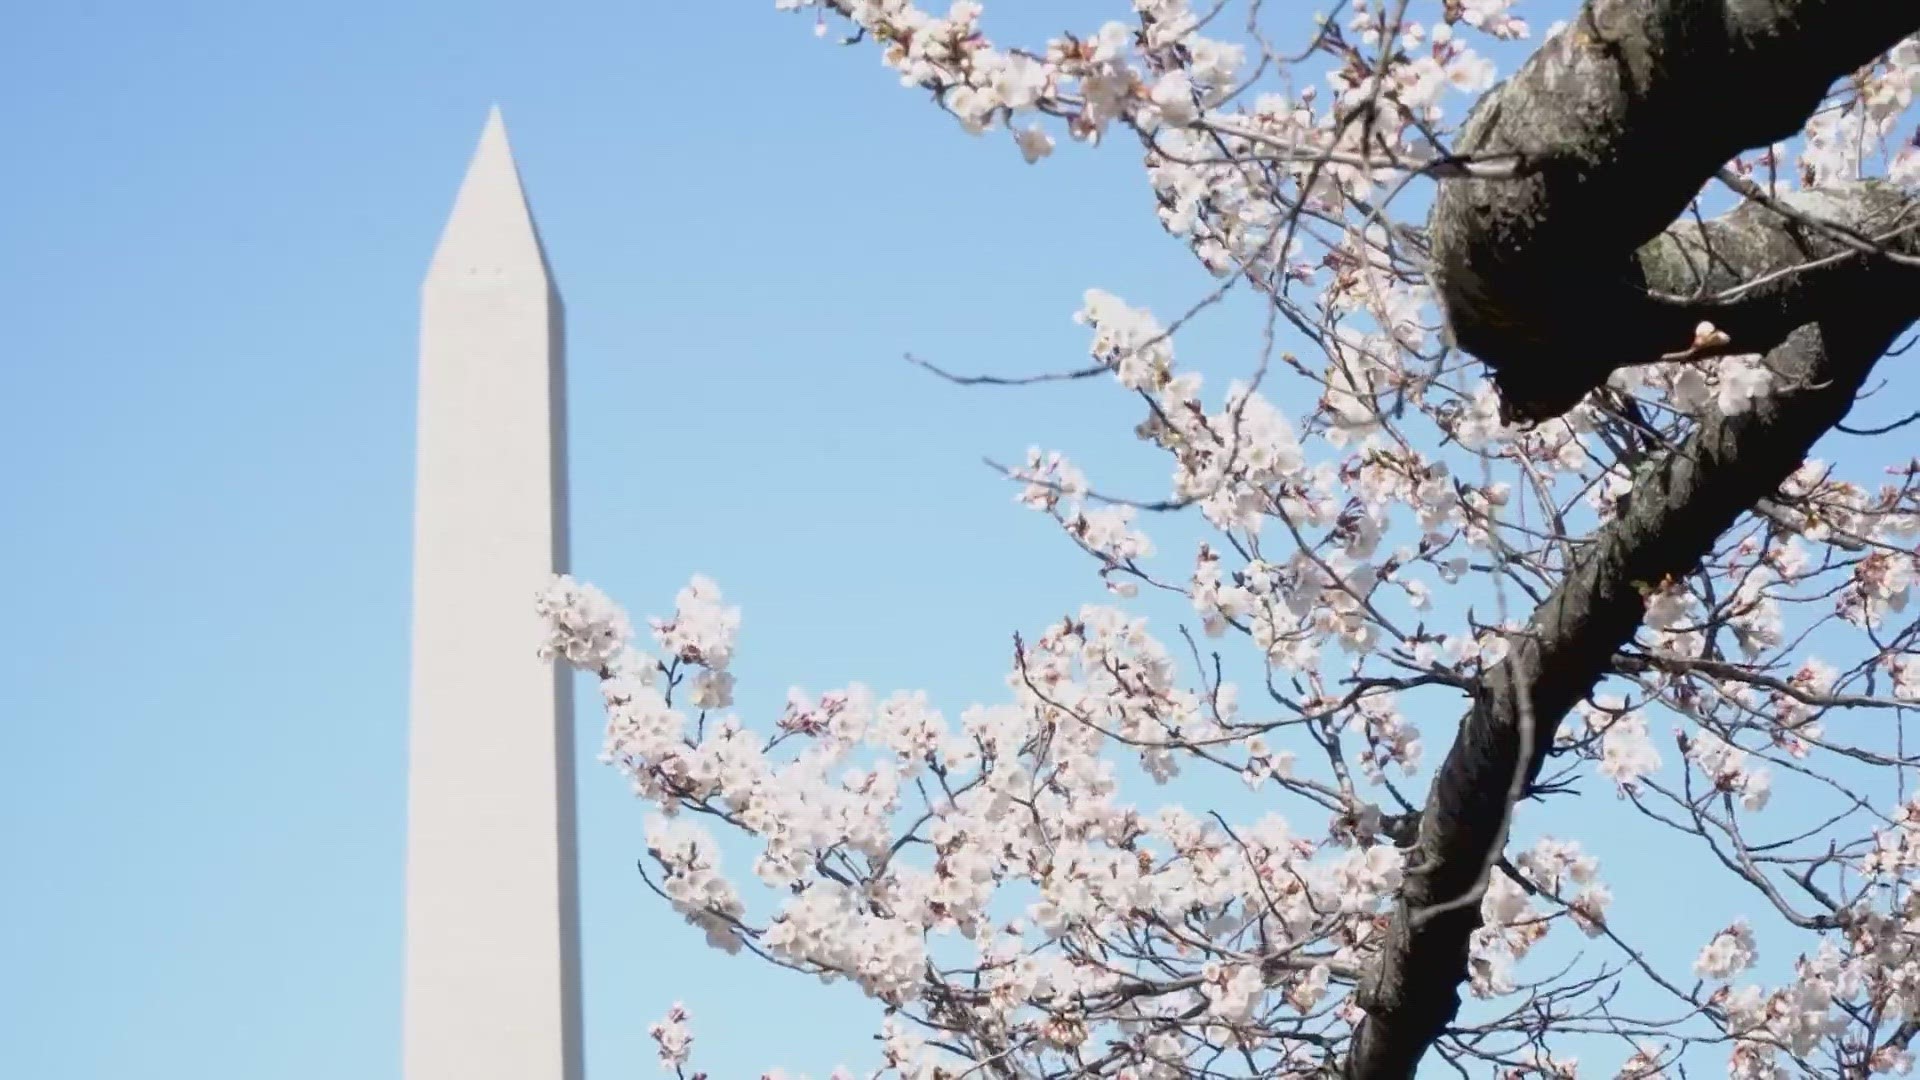 Professional photographer, Chris Fukuda, shares how you can take great photos of the blossoms.